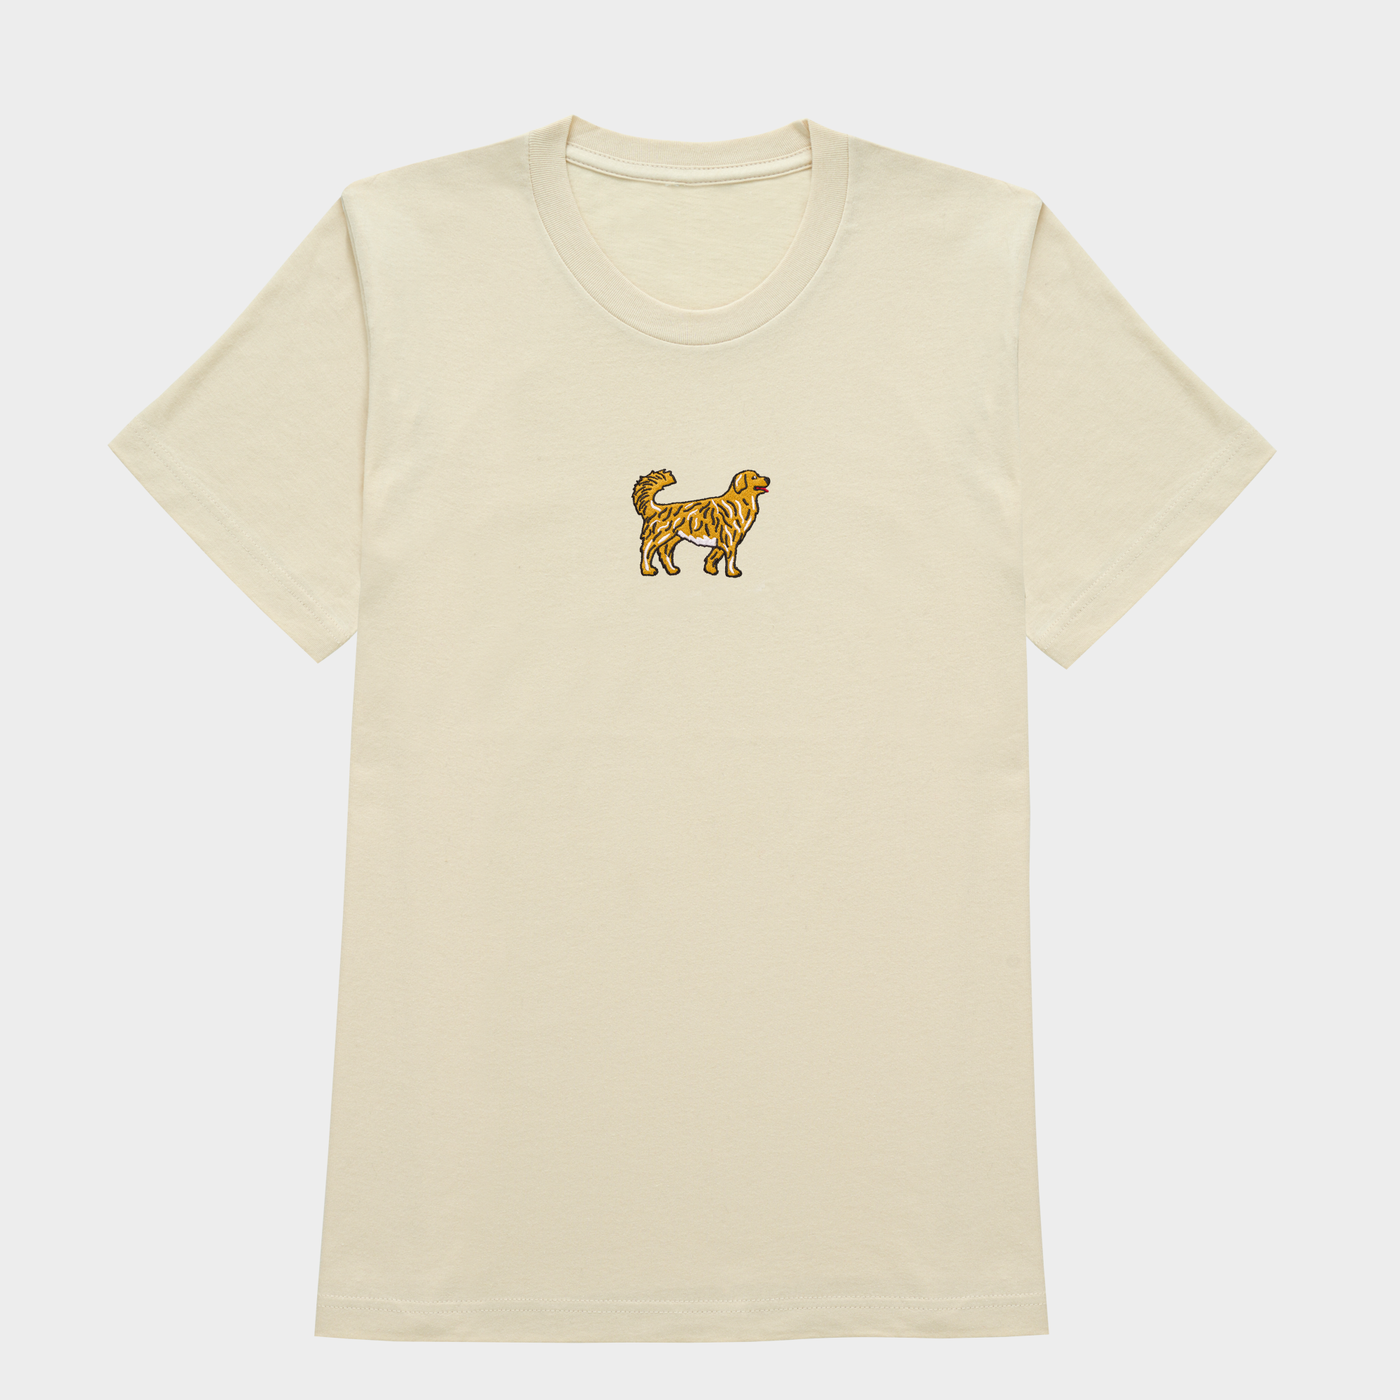 Bobby's Planet Women's Embroidered Golden Retriever T-Shirt from Paws Dog Cat Animals Collection in Soft Cream Color#color_soft-cream